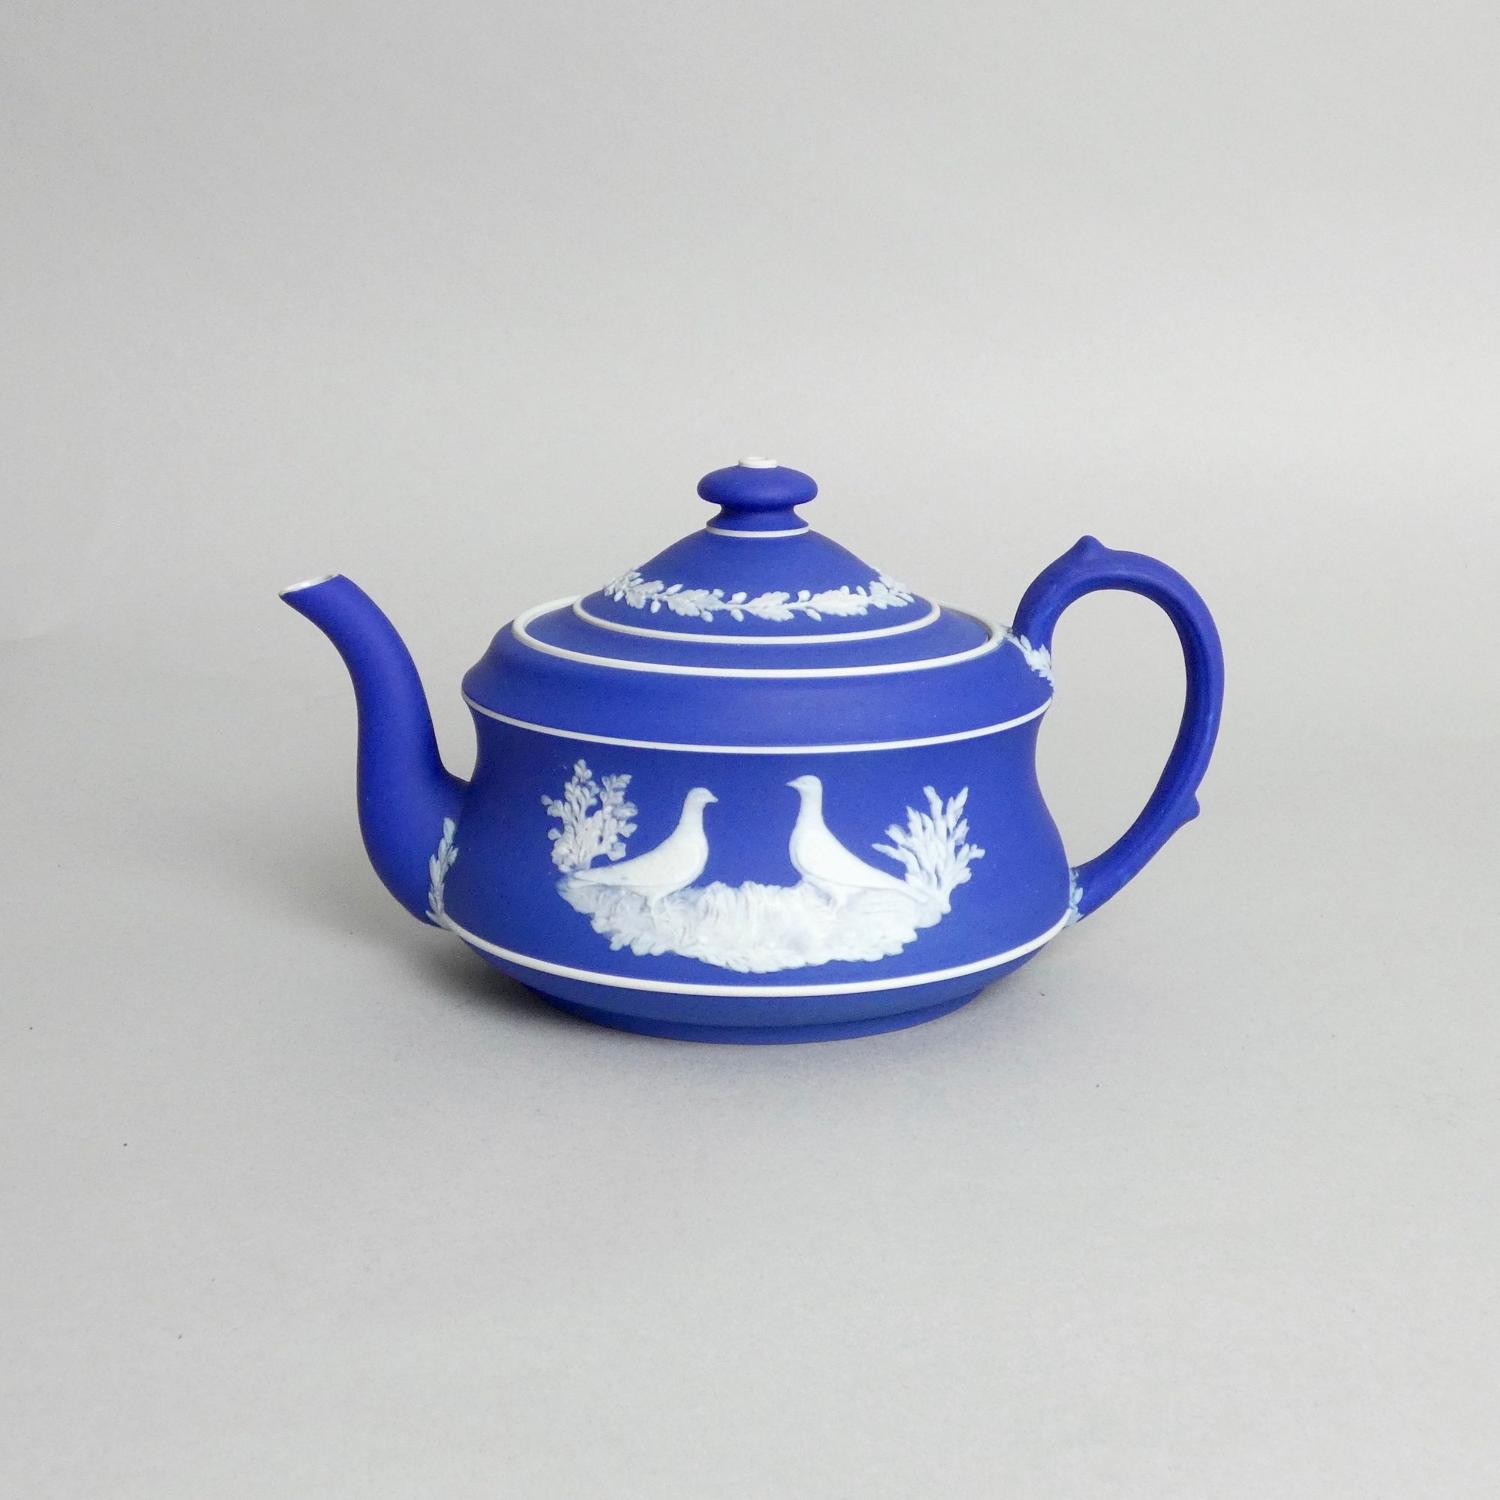 Wedgwood teapot made for Capperns